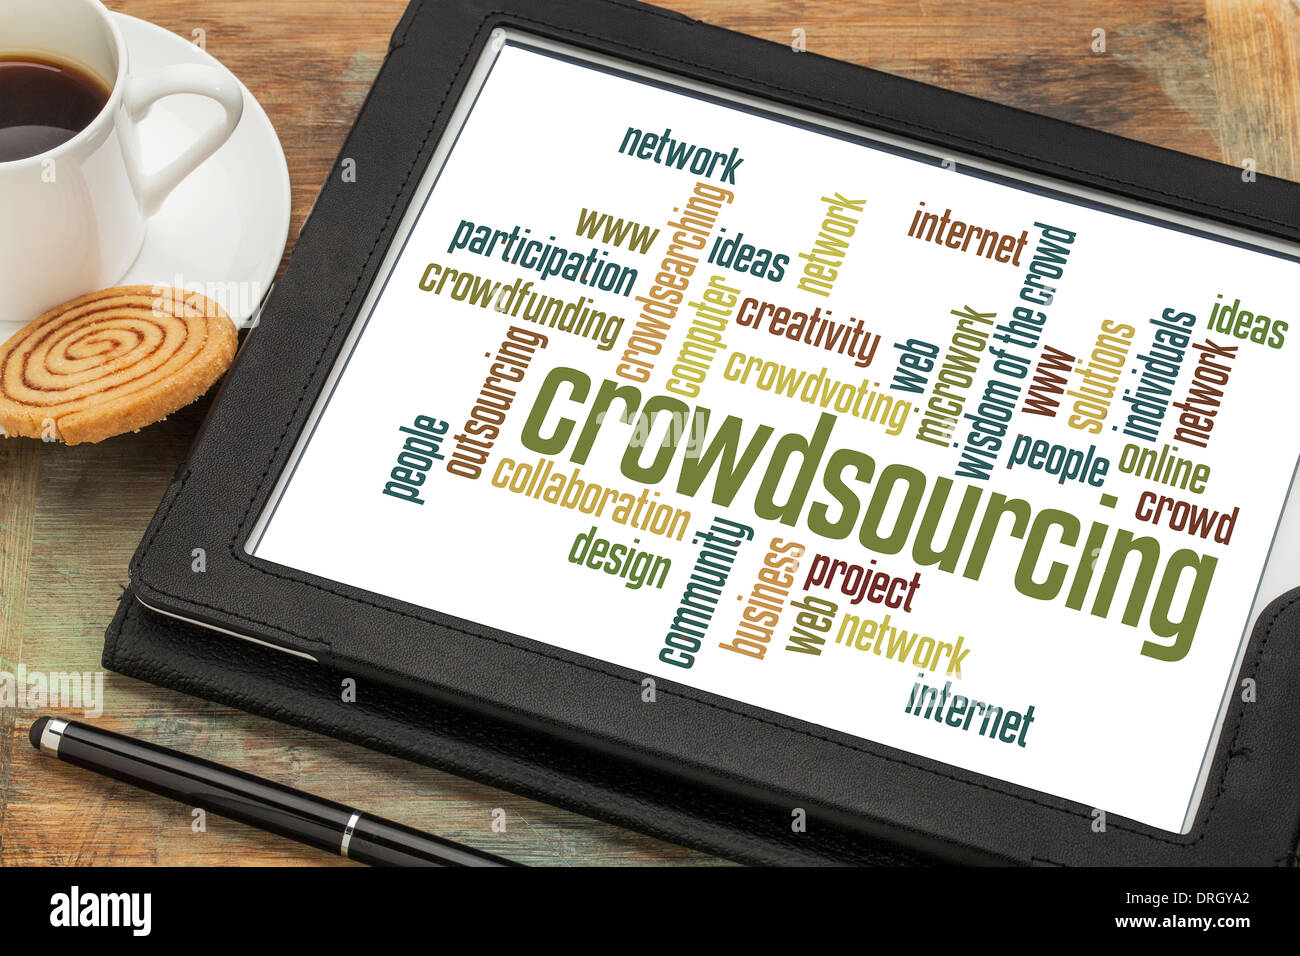 crowdsourcing word cloud on a digital tablet with a cup of coffee Stock Photo